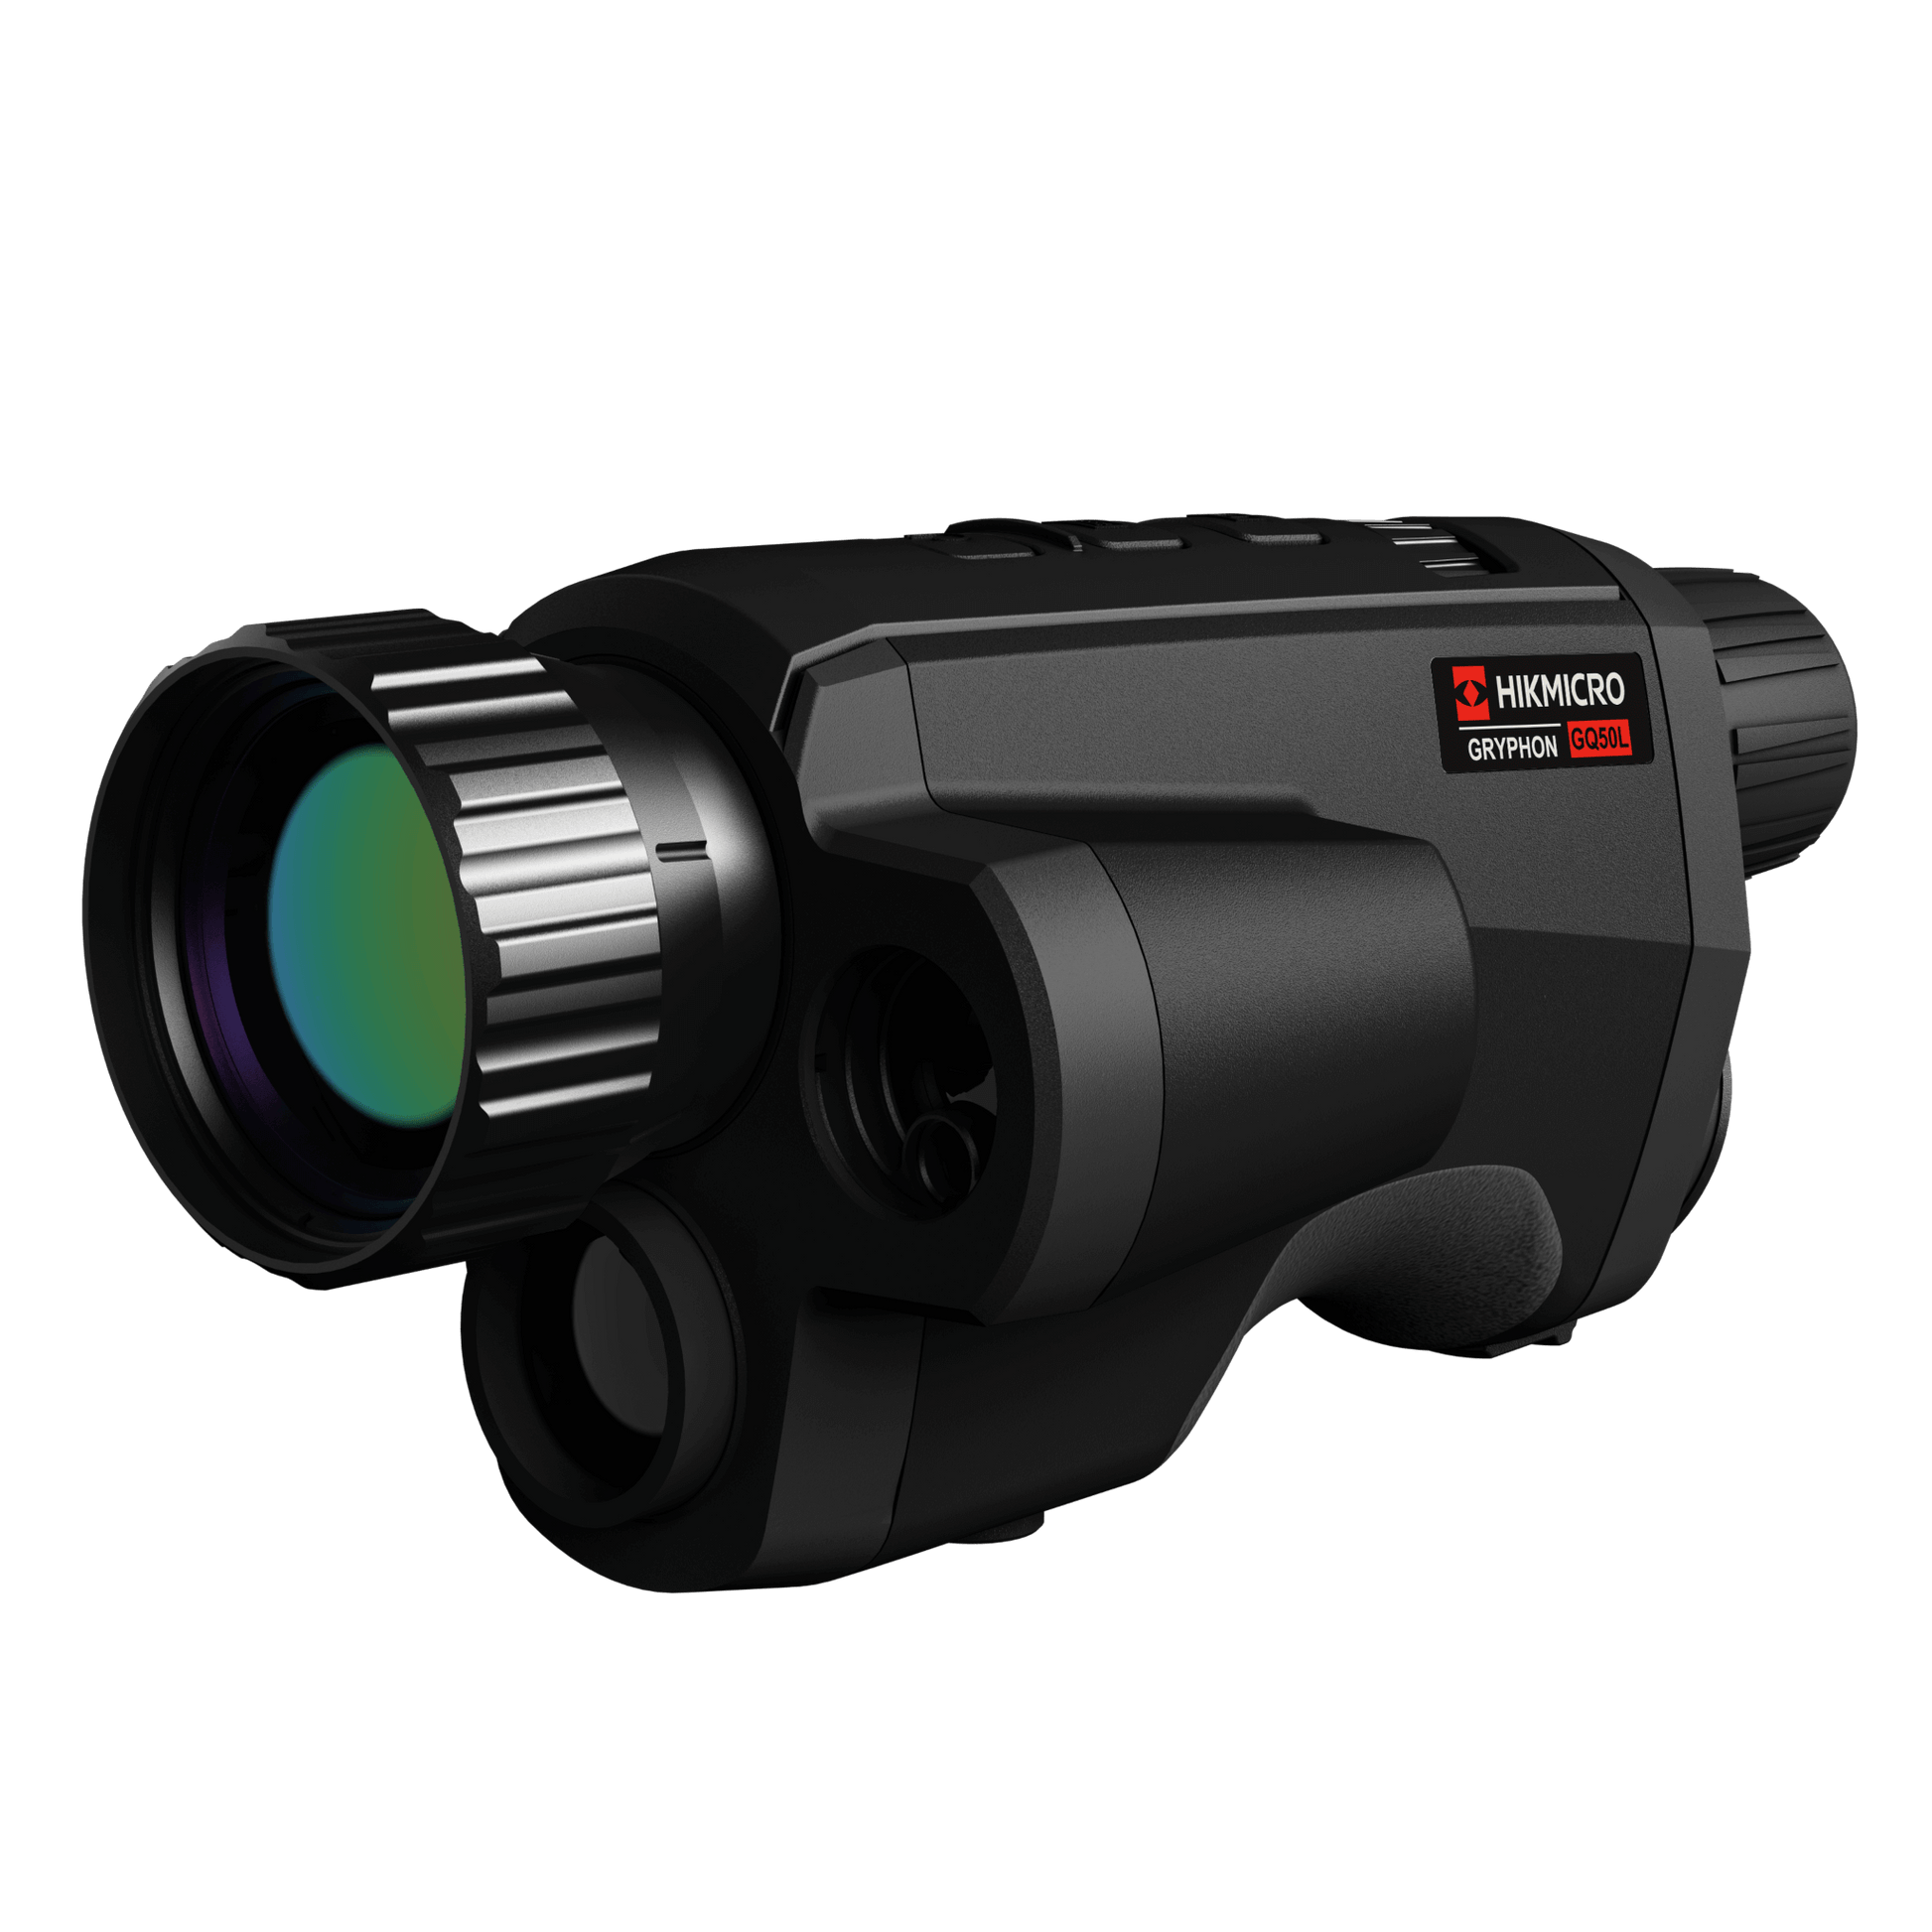 Cape Thermal imaging monocular for sale - HikMicro Gryphon GQ50L Handheld thermal monocular front left view with laser range finder